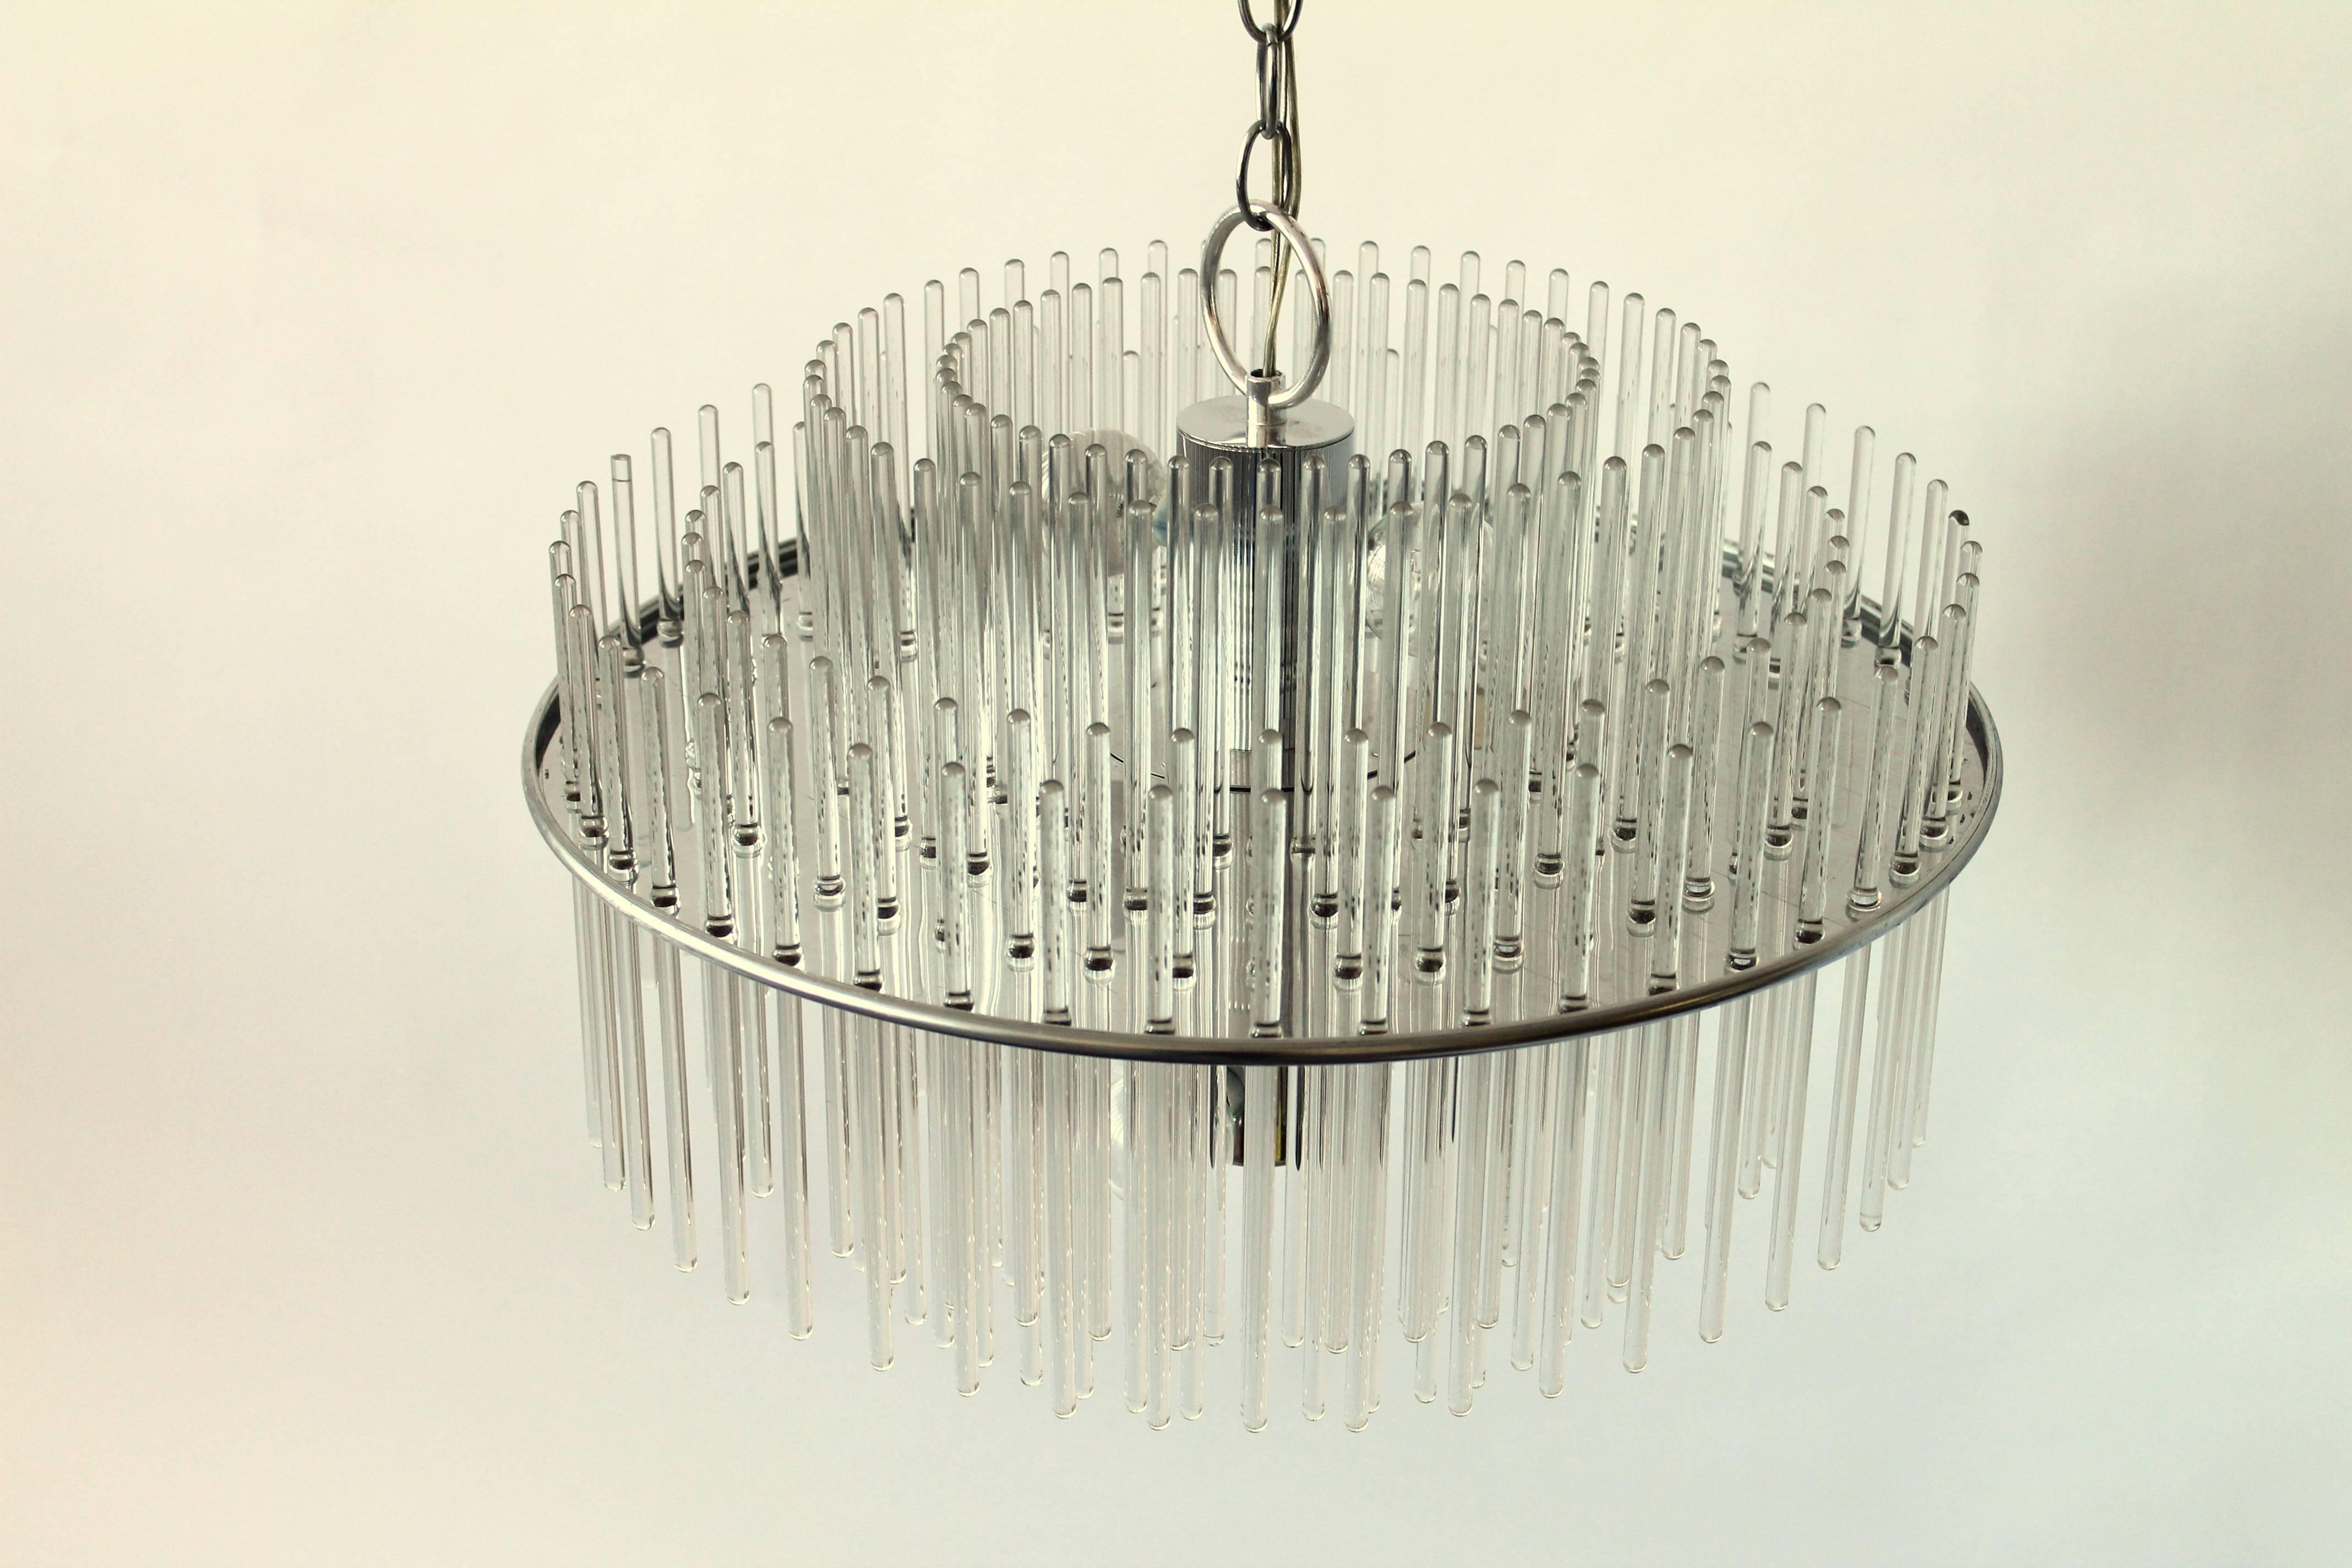 American Classic Glass Rod Chandelier from Lightolier, 1980s, USA